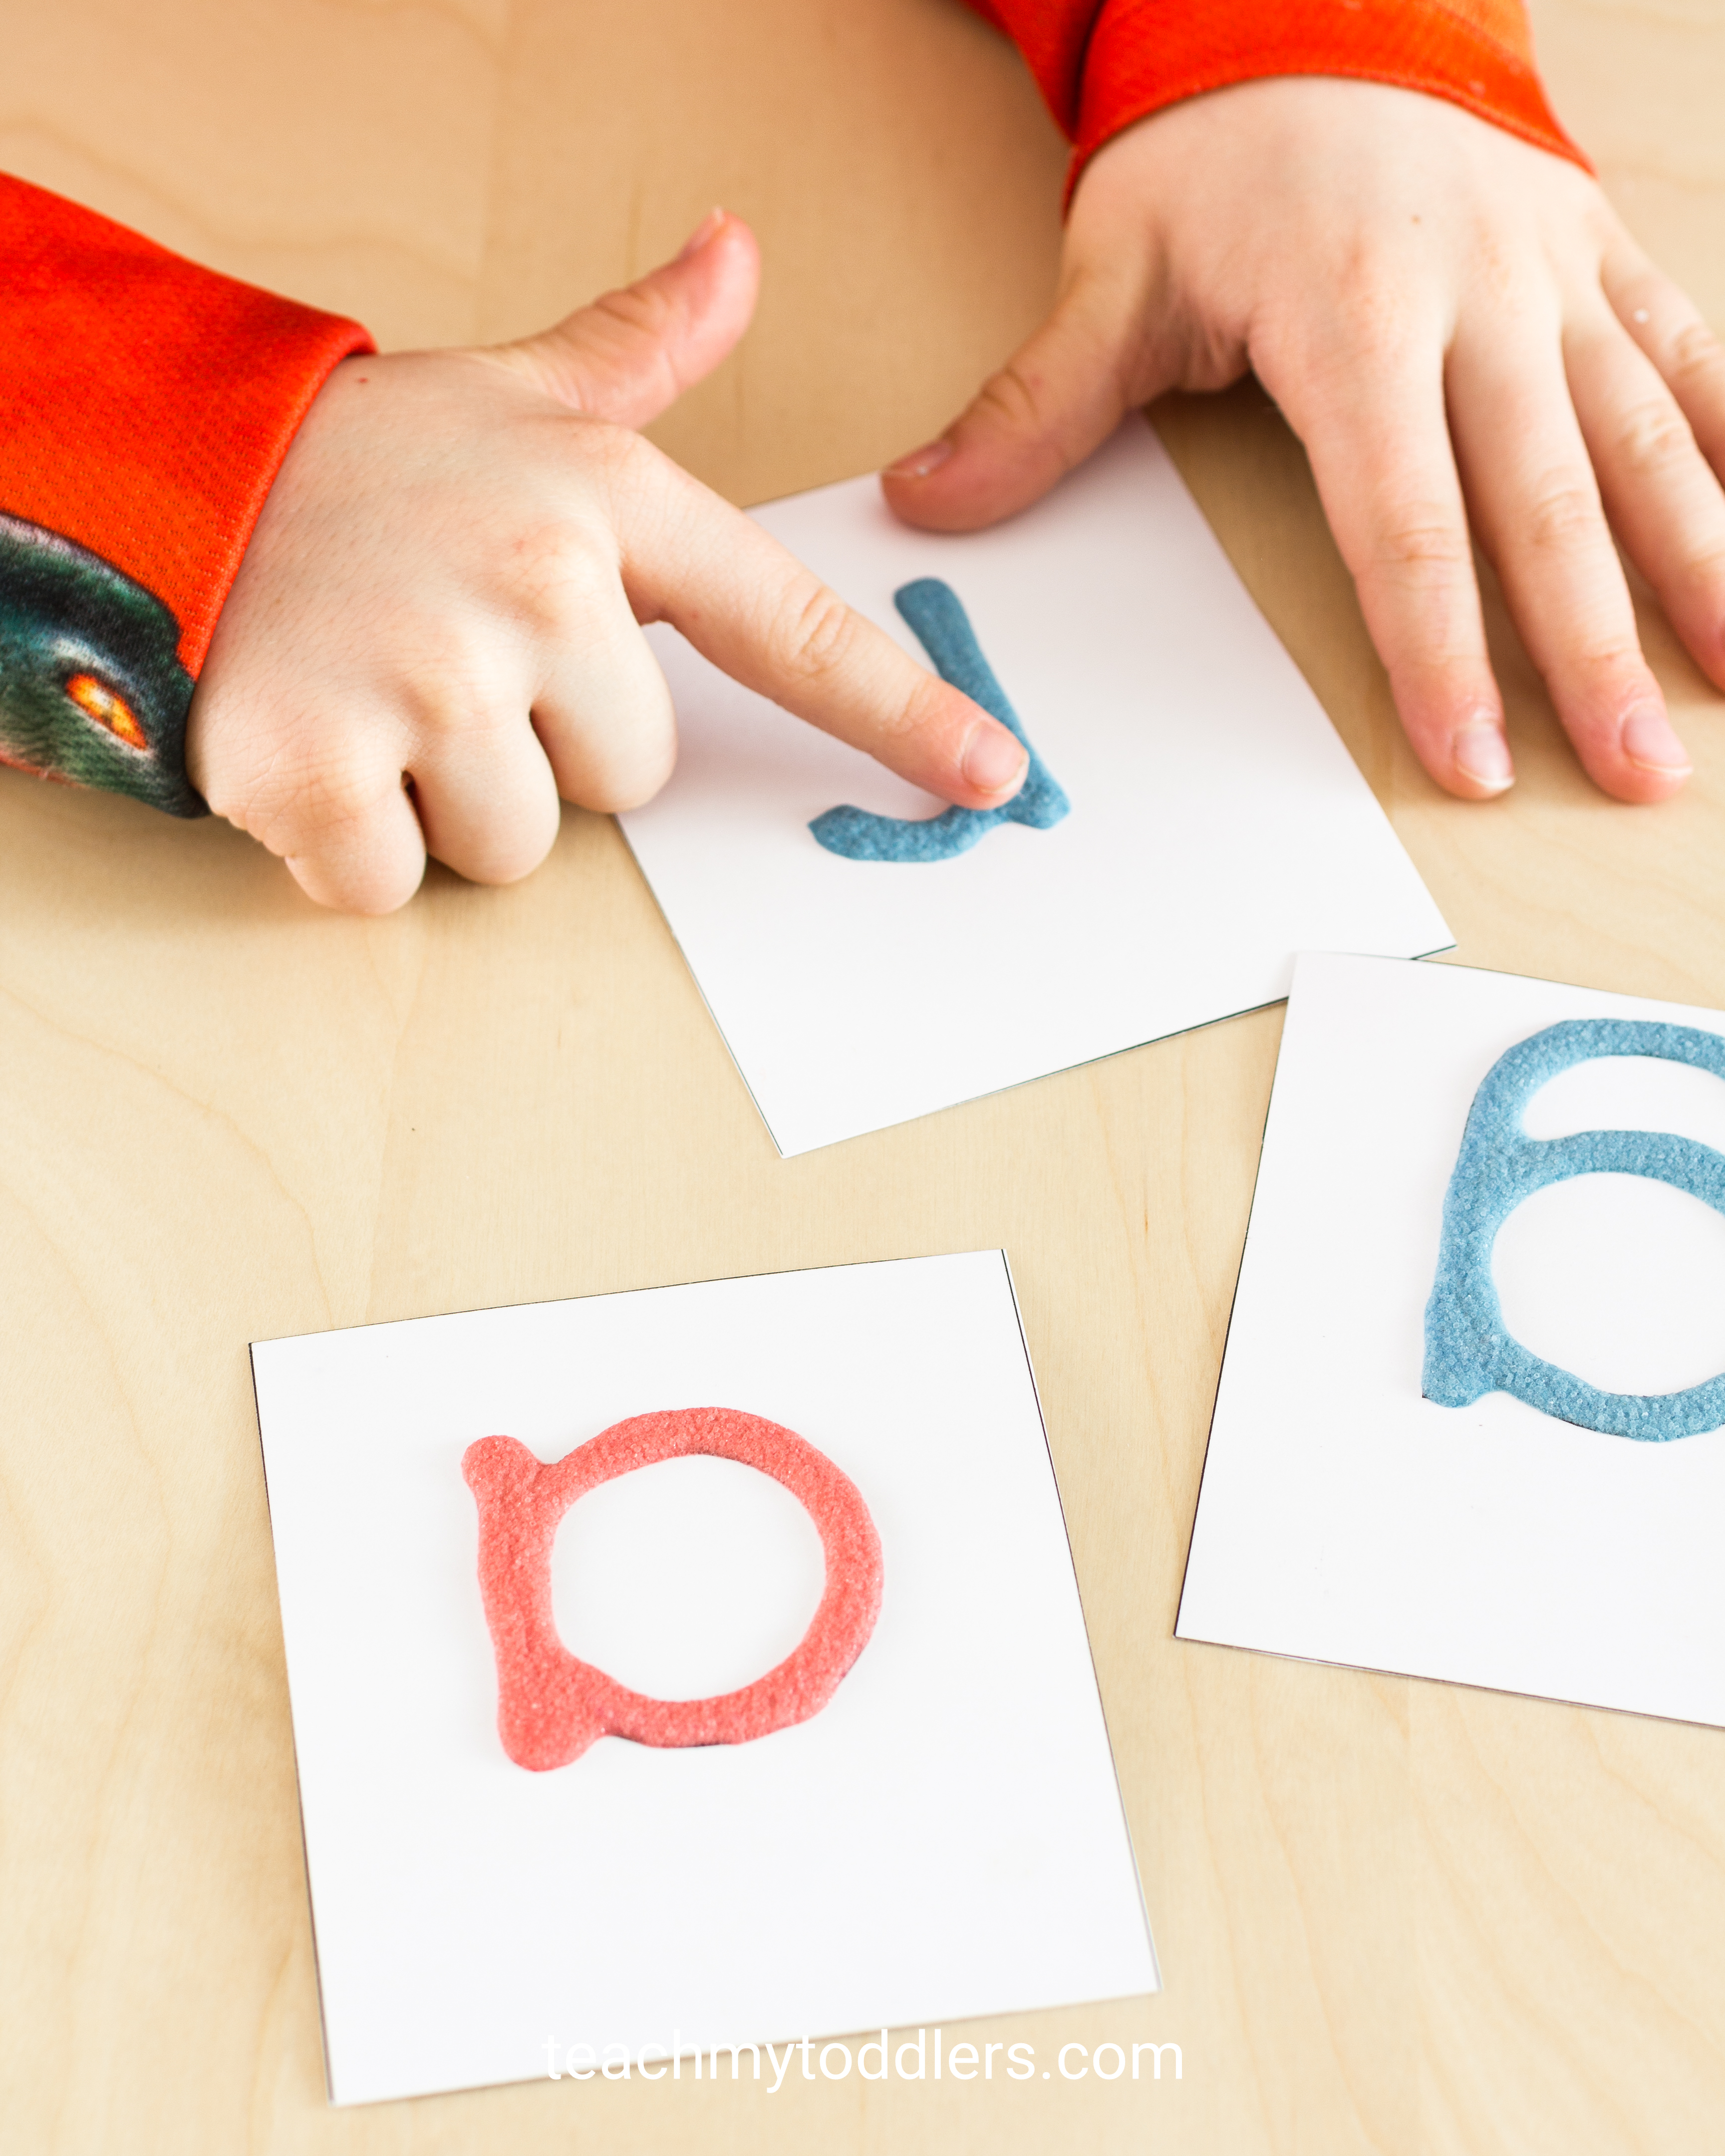 Discover how to use puffy paints to teach your toddlers letters